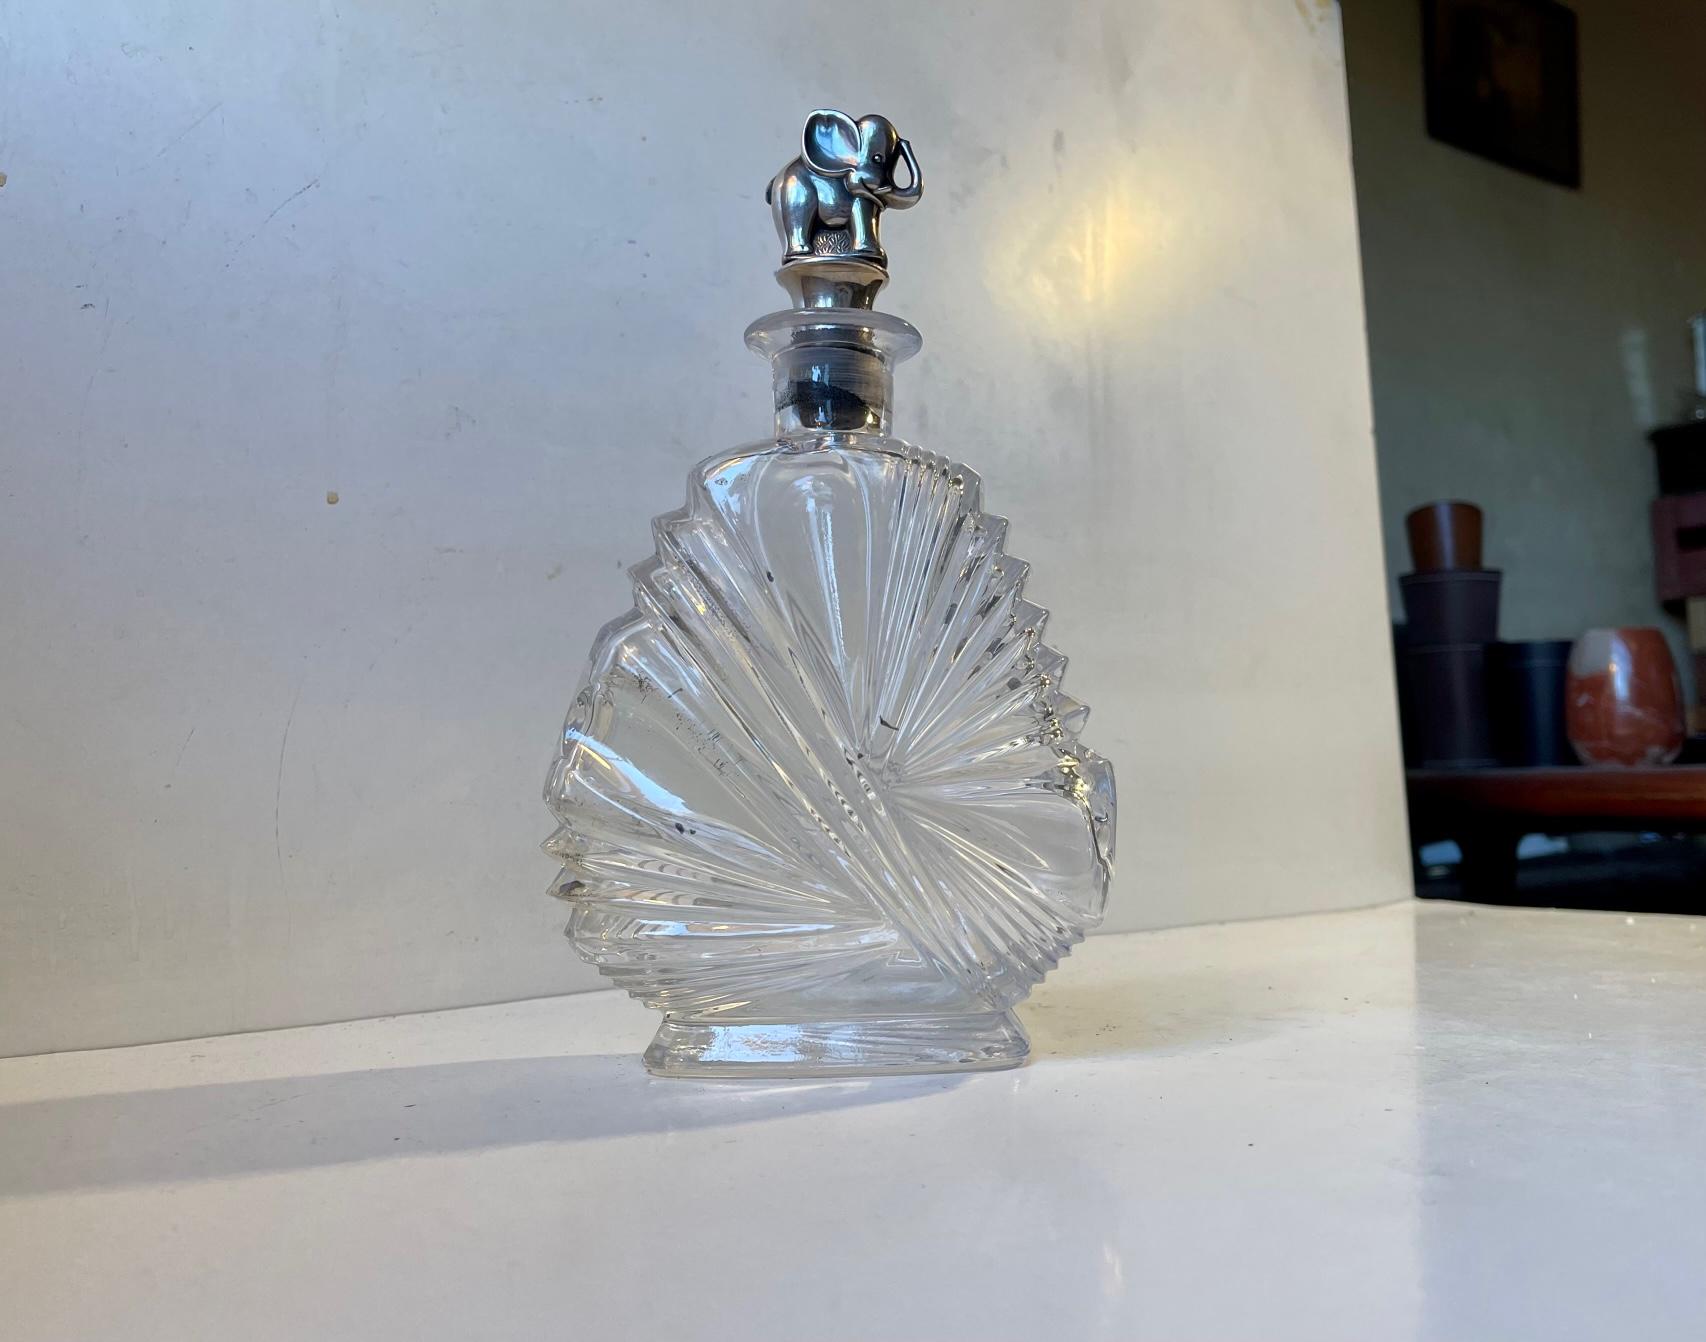 Stylish decanter in cut and polished lead crystal. Anonymous French or Belgian maker in the style of Baccarat. It comes with a baby elephant stopper in silver (indistinguishable hallmark and made by Scandinavian silversmith NS (not identified). The